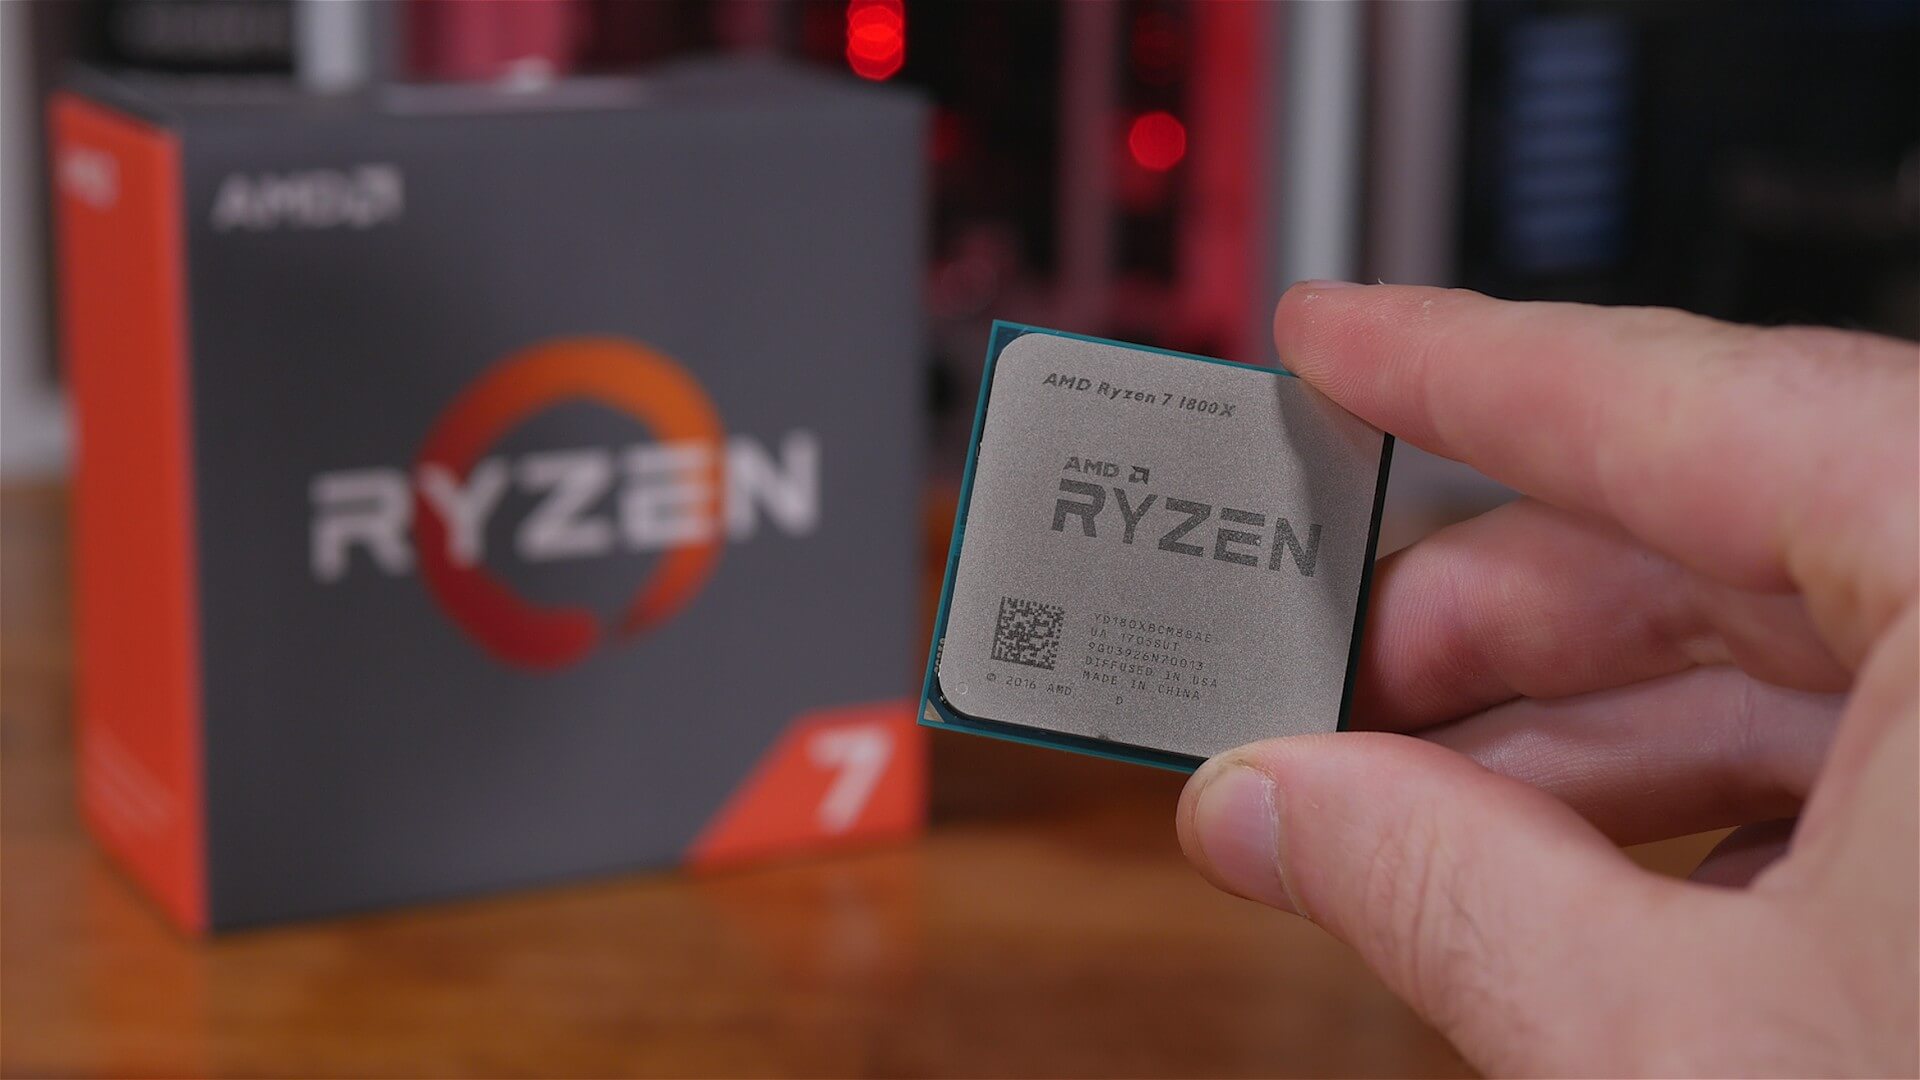 Frustrating Botany Smoothly Two Years Later: AMD Ryzen 7 1800X vs. Intel Core i7-7700K | TechSpot